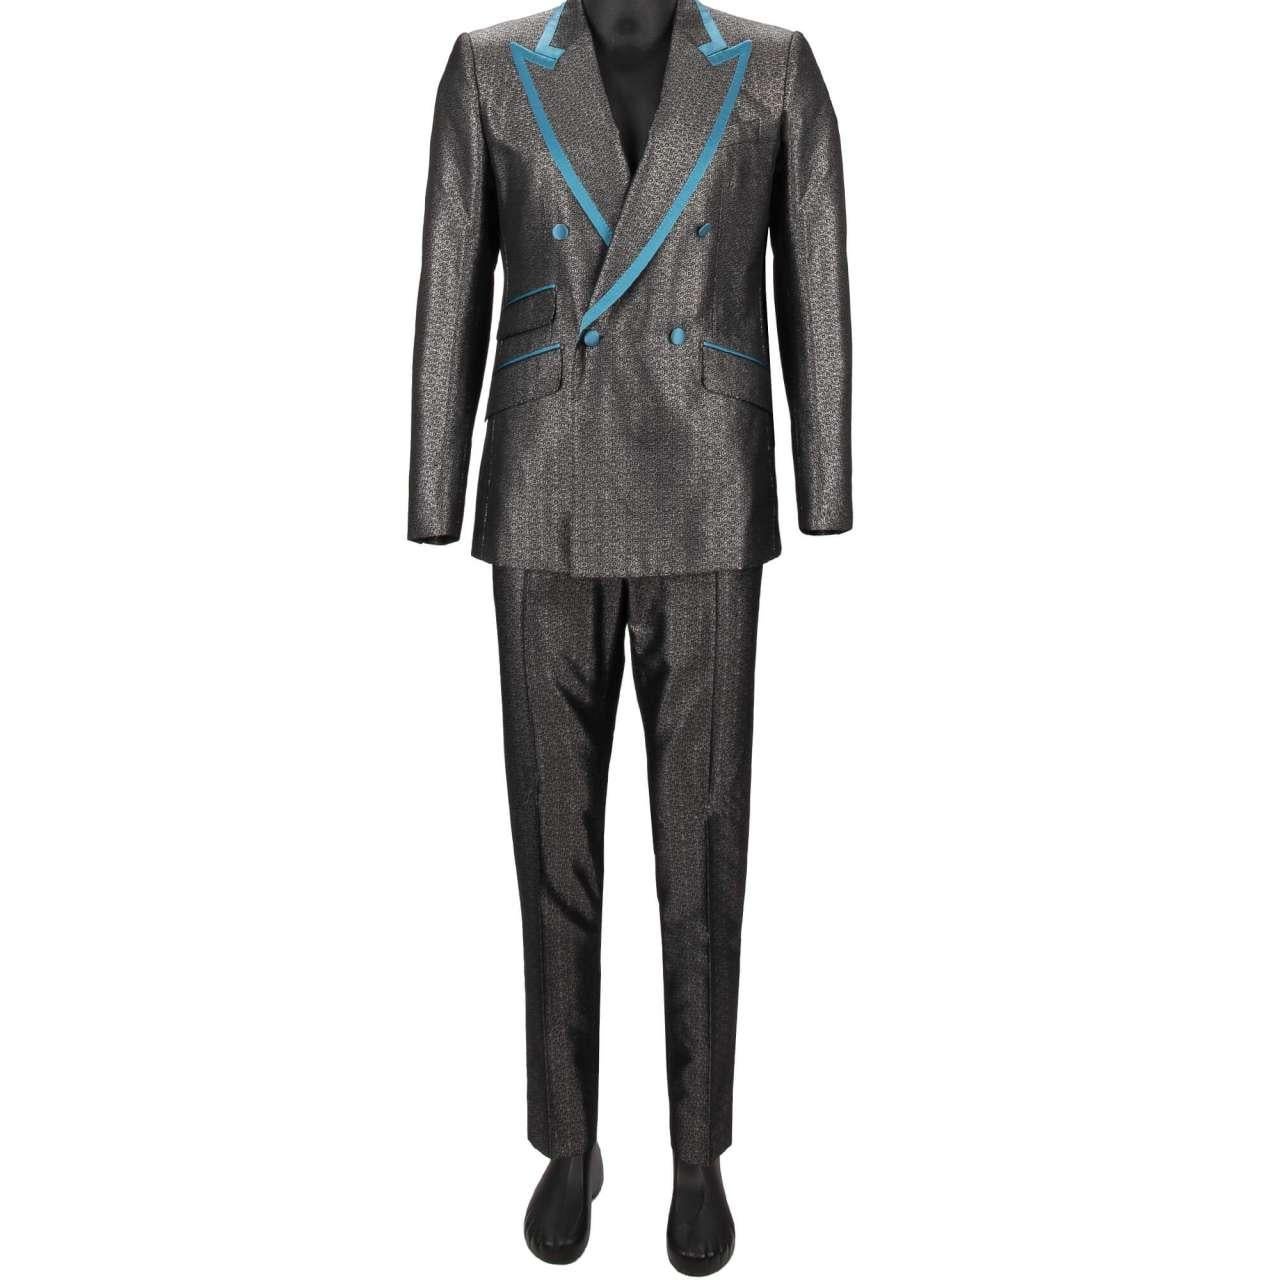 Dolce & Gabbana Glitter Jacquard Double breasted Suit Silver Blue 48 US 38 M For Sale 2